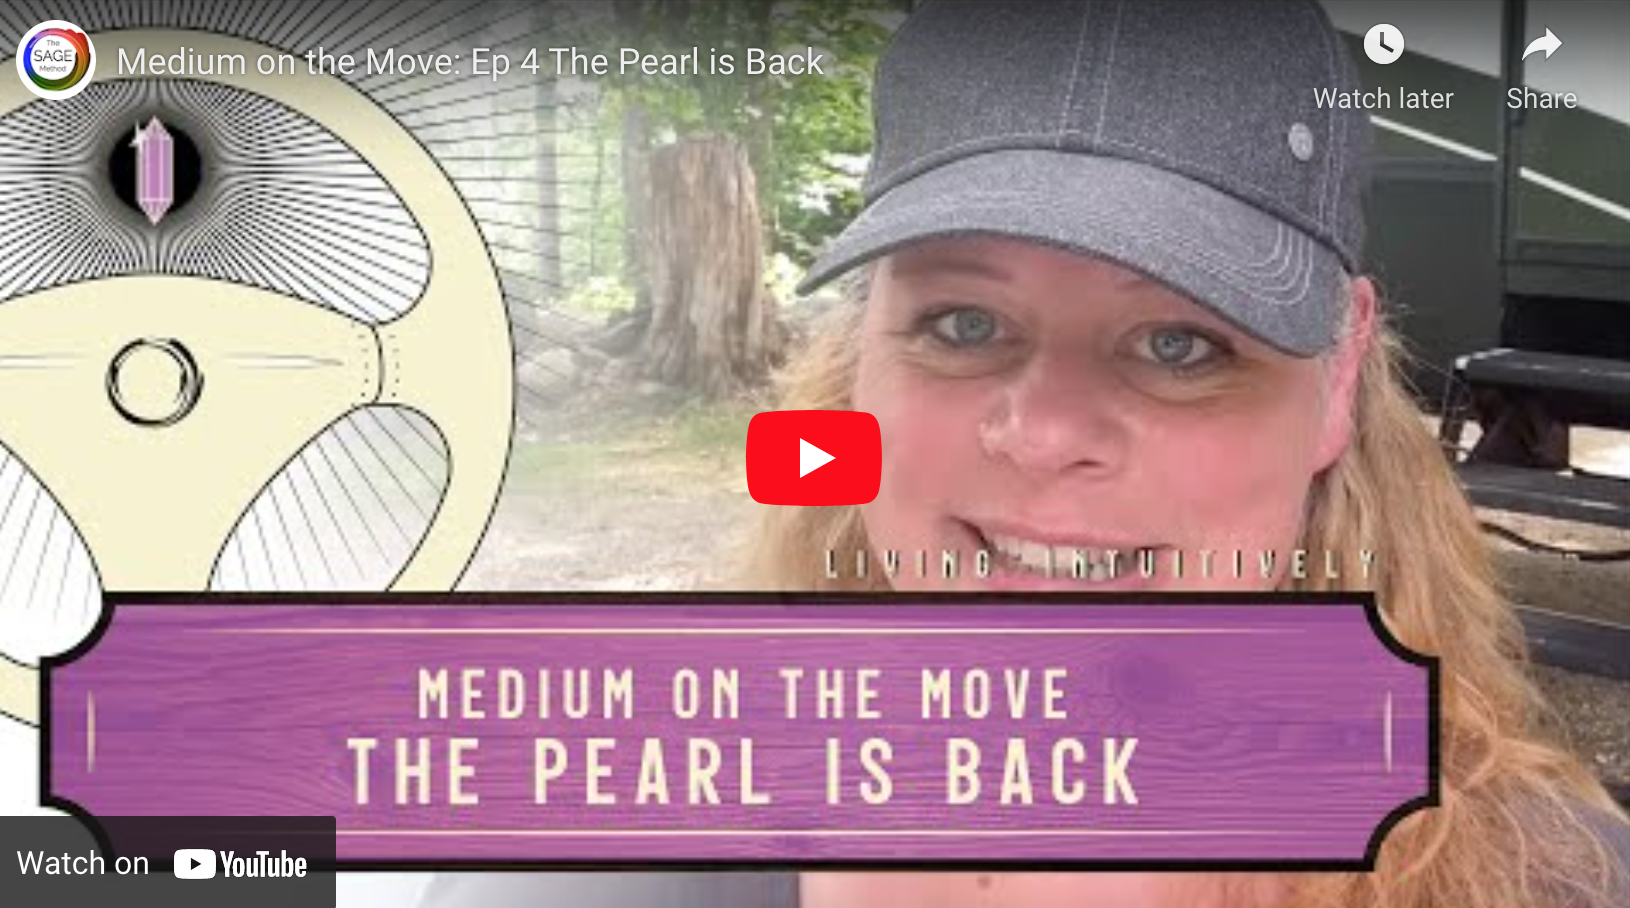 The Pearl is Back